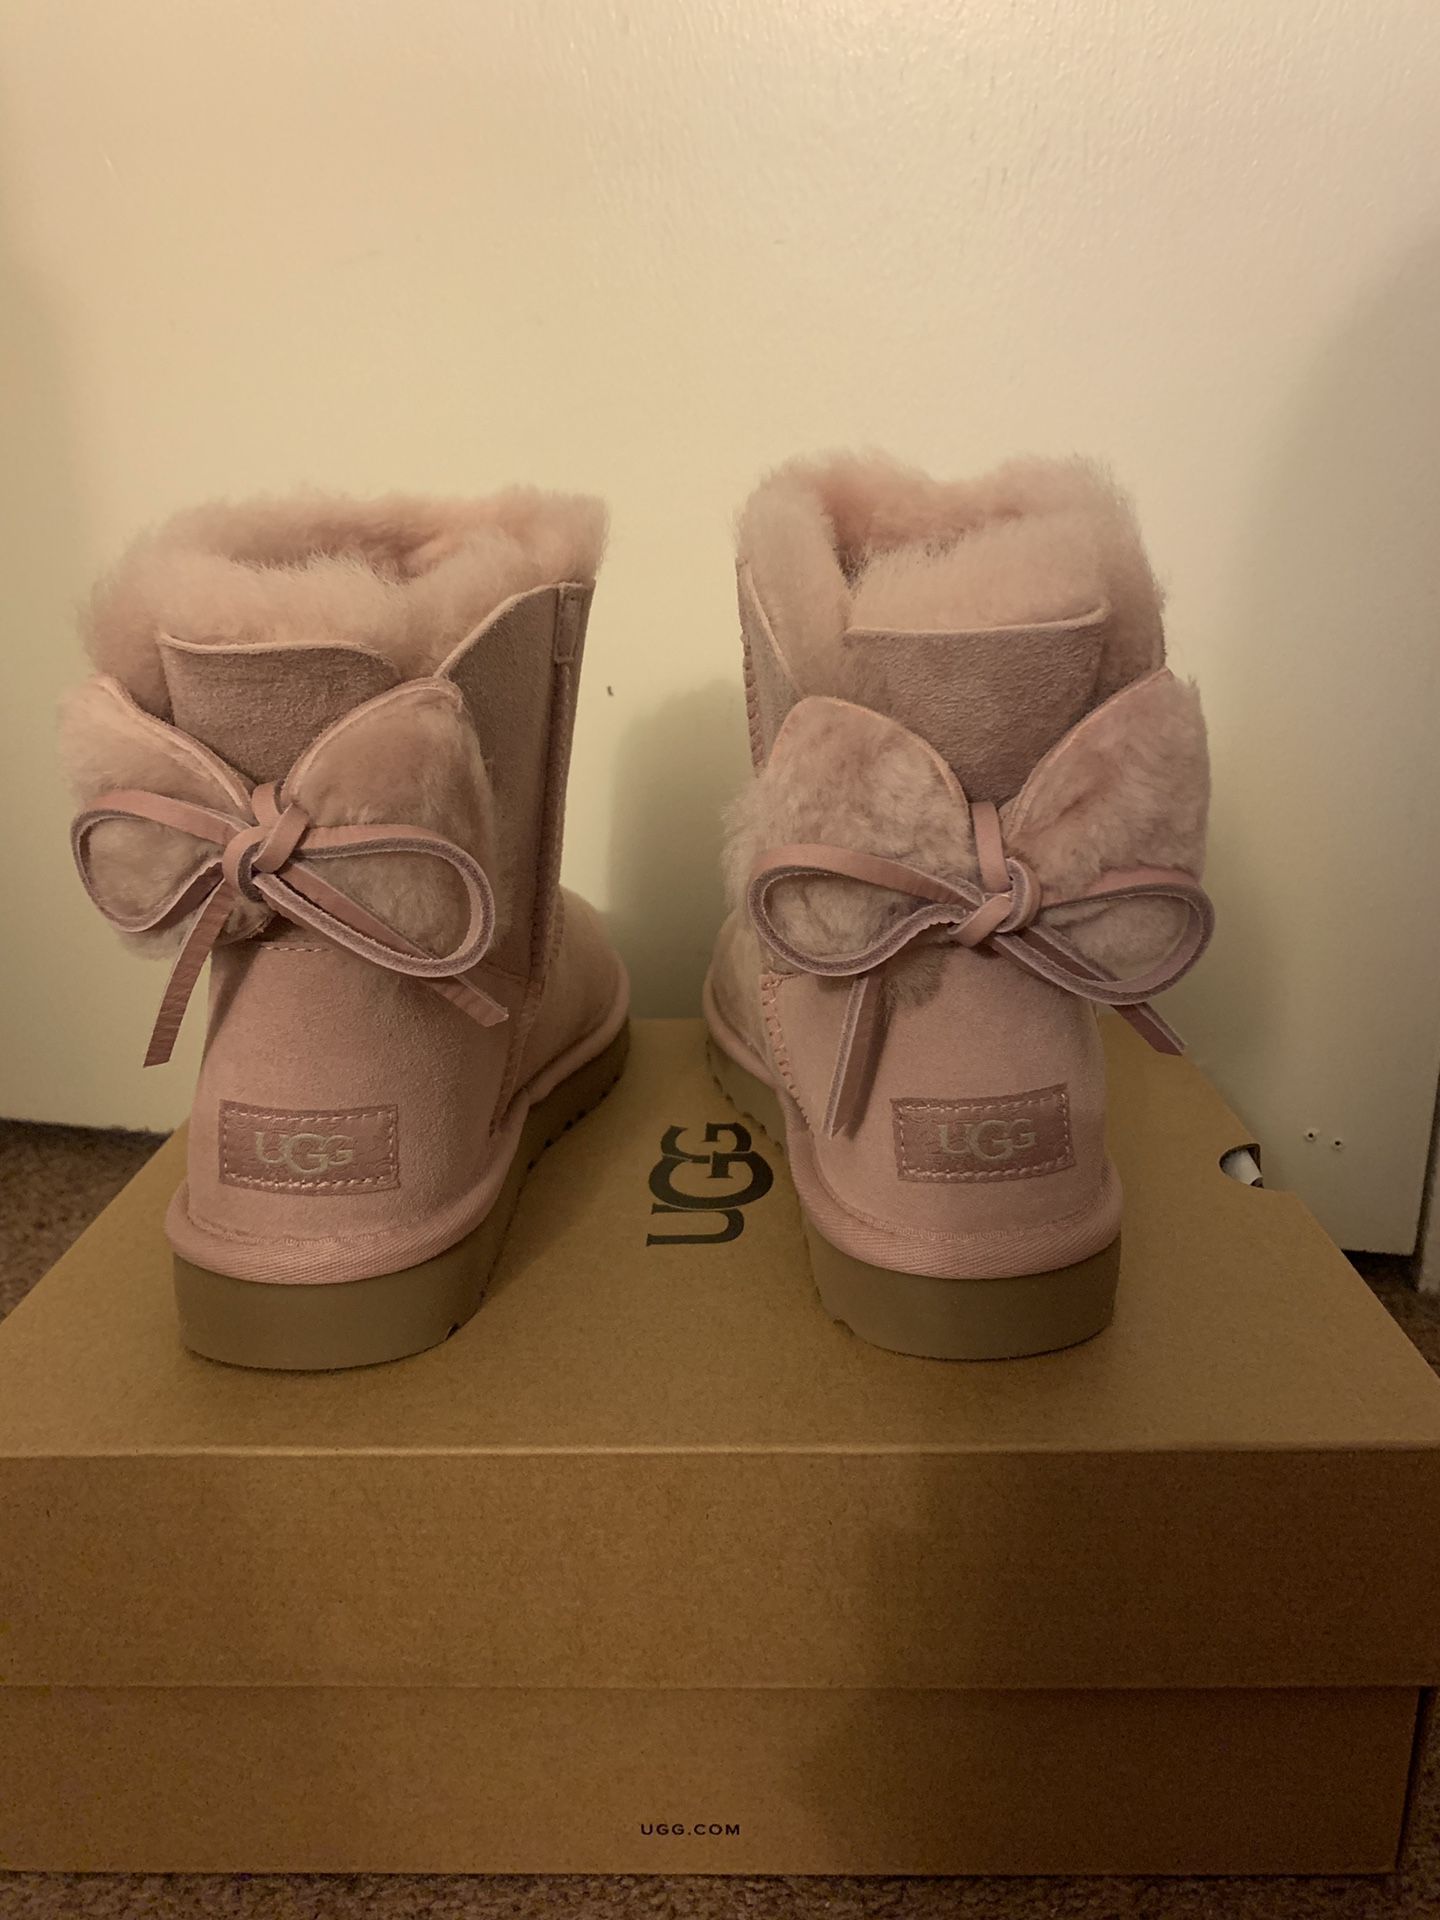 100% Authentic Brand New in Box UGG Classic Double Bow Mini Boots / Color: Pink Crystal / Women size 5, Women size 6 and women size 7